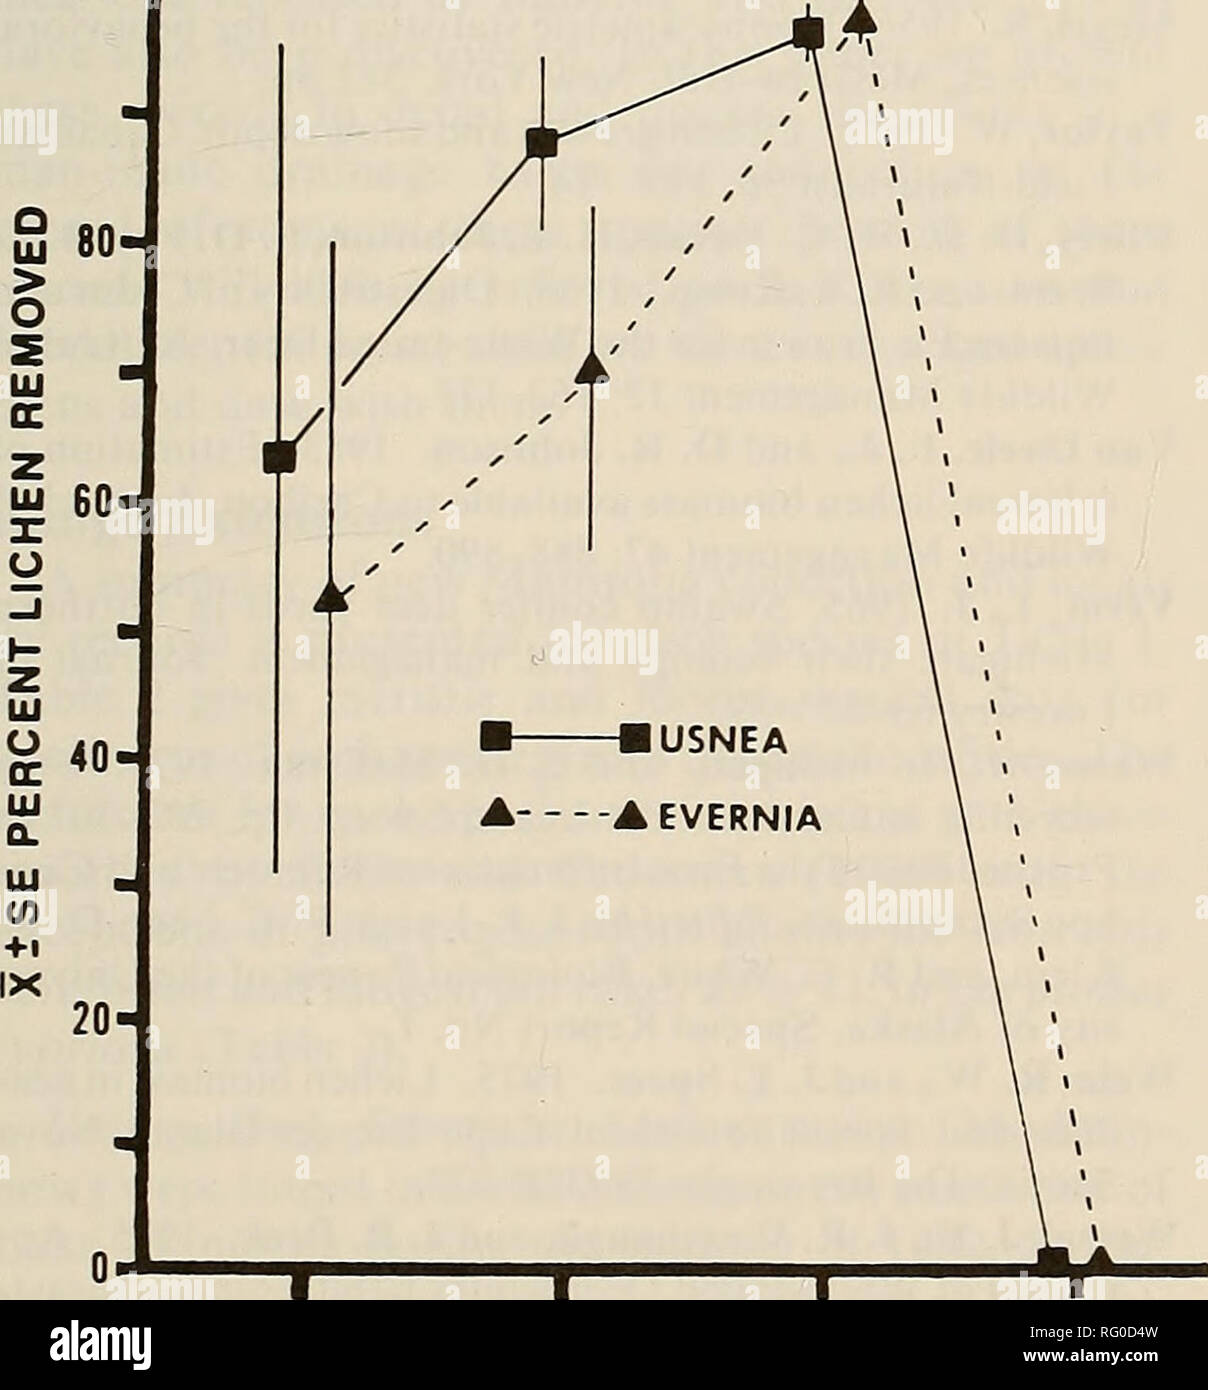 . The Canadian field-naturalist. 1985 HODGMAN AND BOWYER: USE OF LICHENS BY WHITE-TAILED DEER 315 Table 2. Dry weight biomass(g) of Evernia mesomorpha in plots on tree boles above (2.40-2.60 m) and within (1.15-1.35 m) the reach of White-tailed Deer in central Maine, March-May 1984. /*= significance level from Mann-Whitney U-lest comparing plots above and within deer reach. N 2.40-2.60 m P 1.15-1.35 m Species X SD Range X SD Range Abies balsamea 15 0.009 0.017 0-0.047 0.09 &lt; 0.001 &lt; 0.001 0-&lt;0.00! Acer rubrum 27 0.036 0.101 0-0.408 0.155 0.005 0.018 0-0.077 Betula papvrifera 3 0 0 0.5 Stock Photo